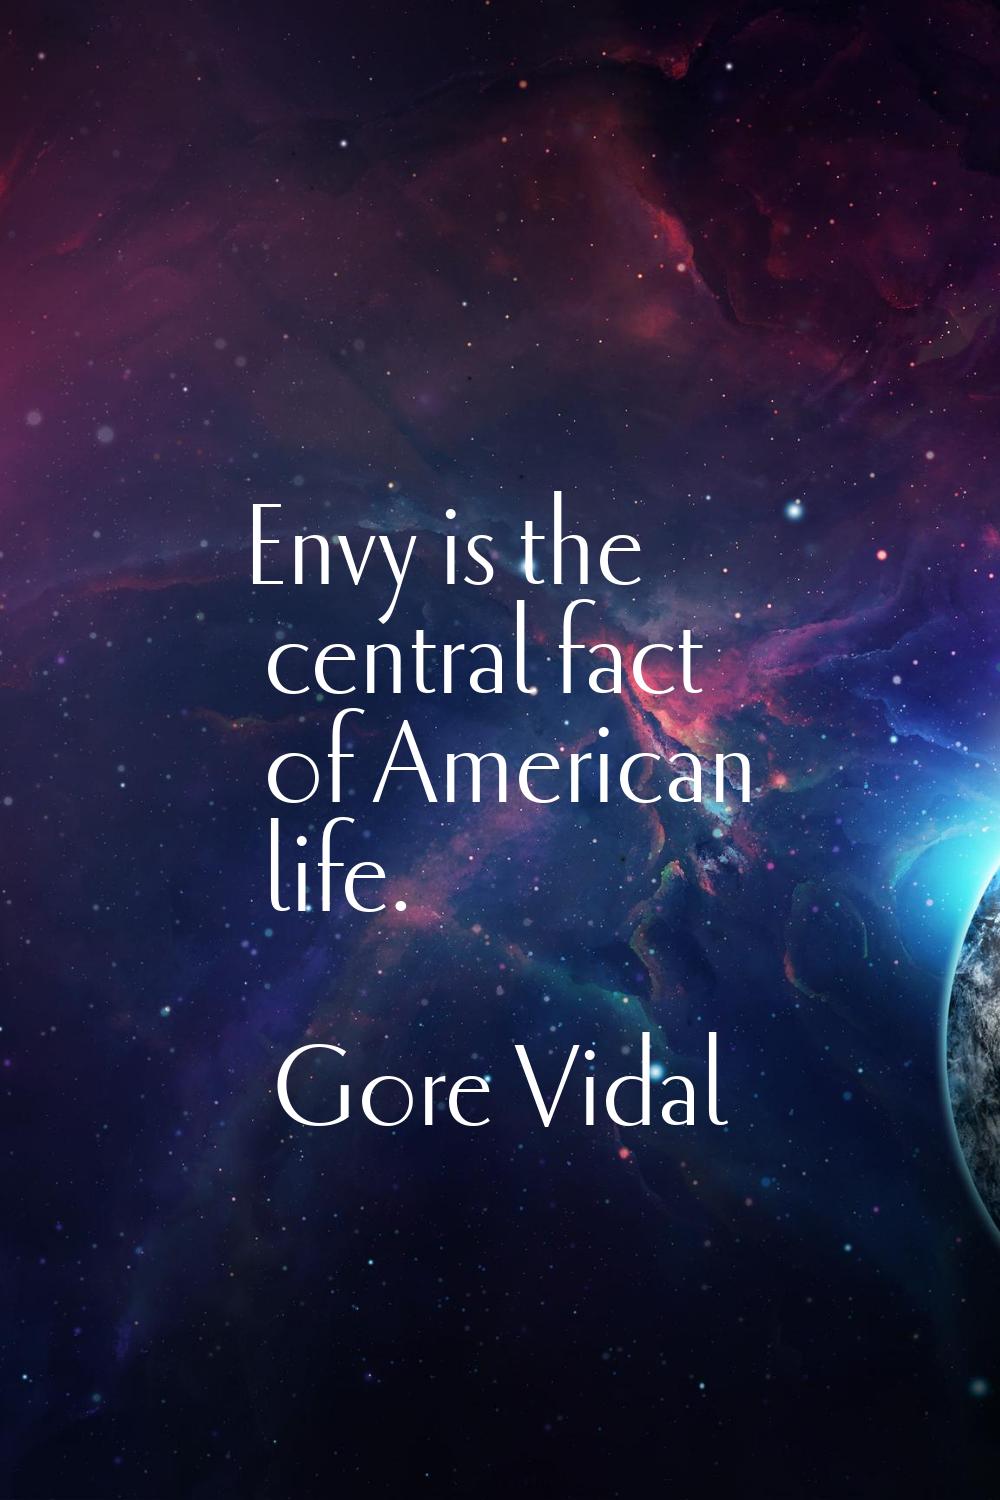 Envy is the central fact of American life.